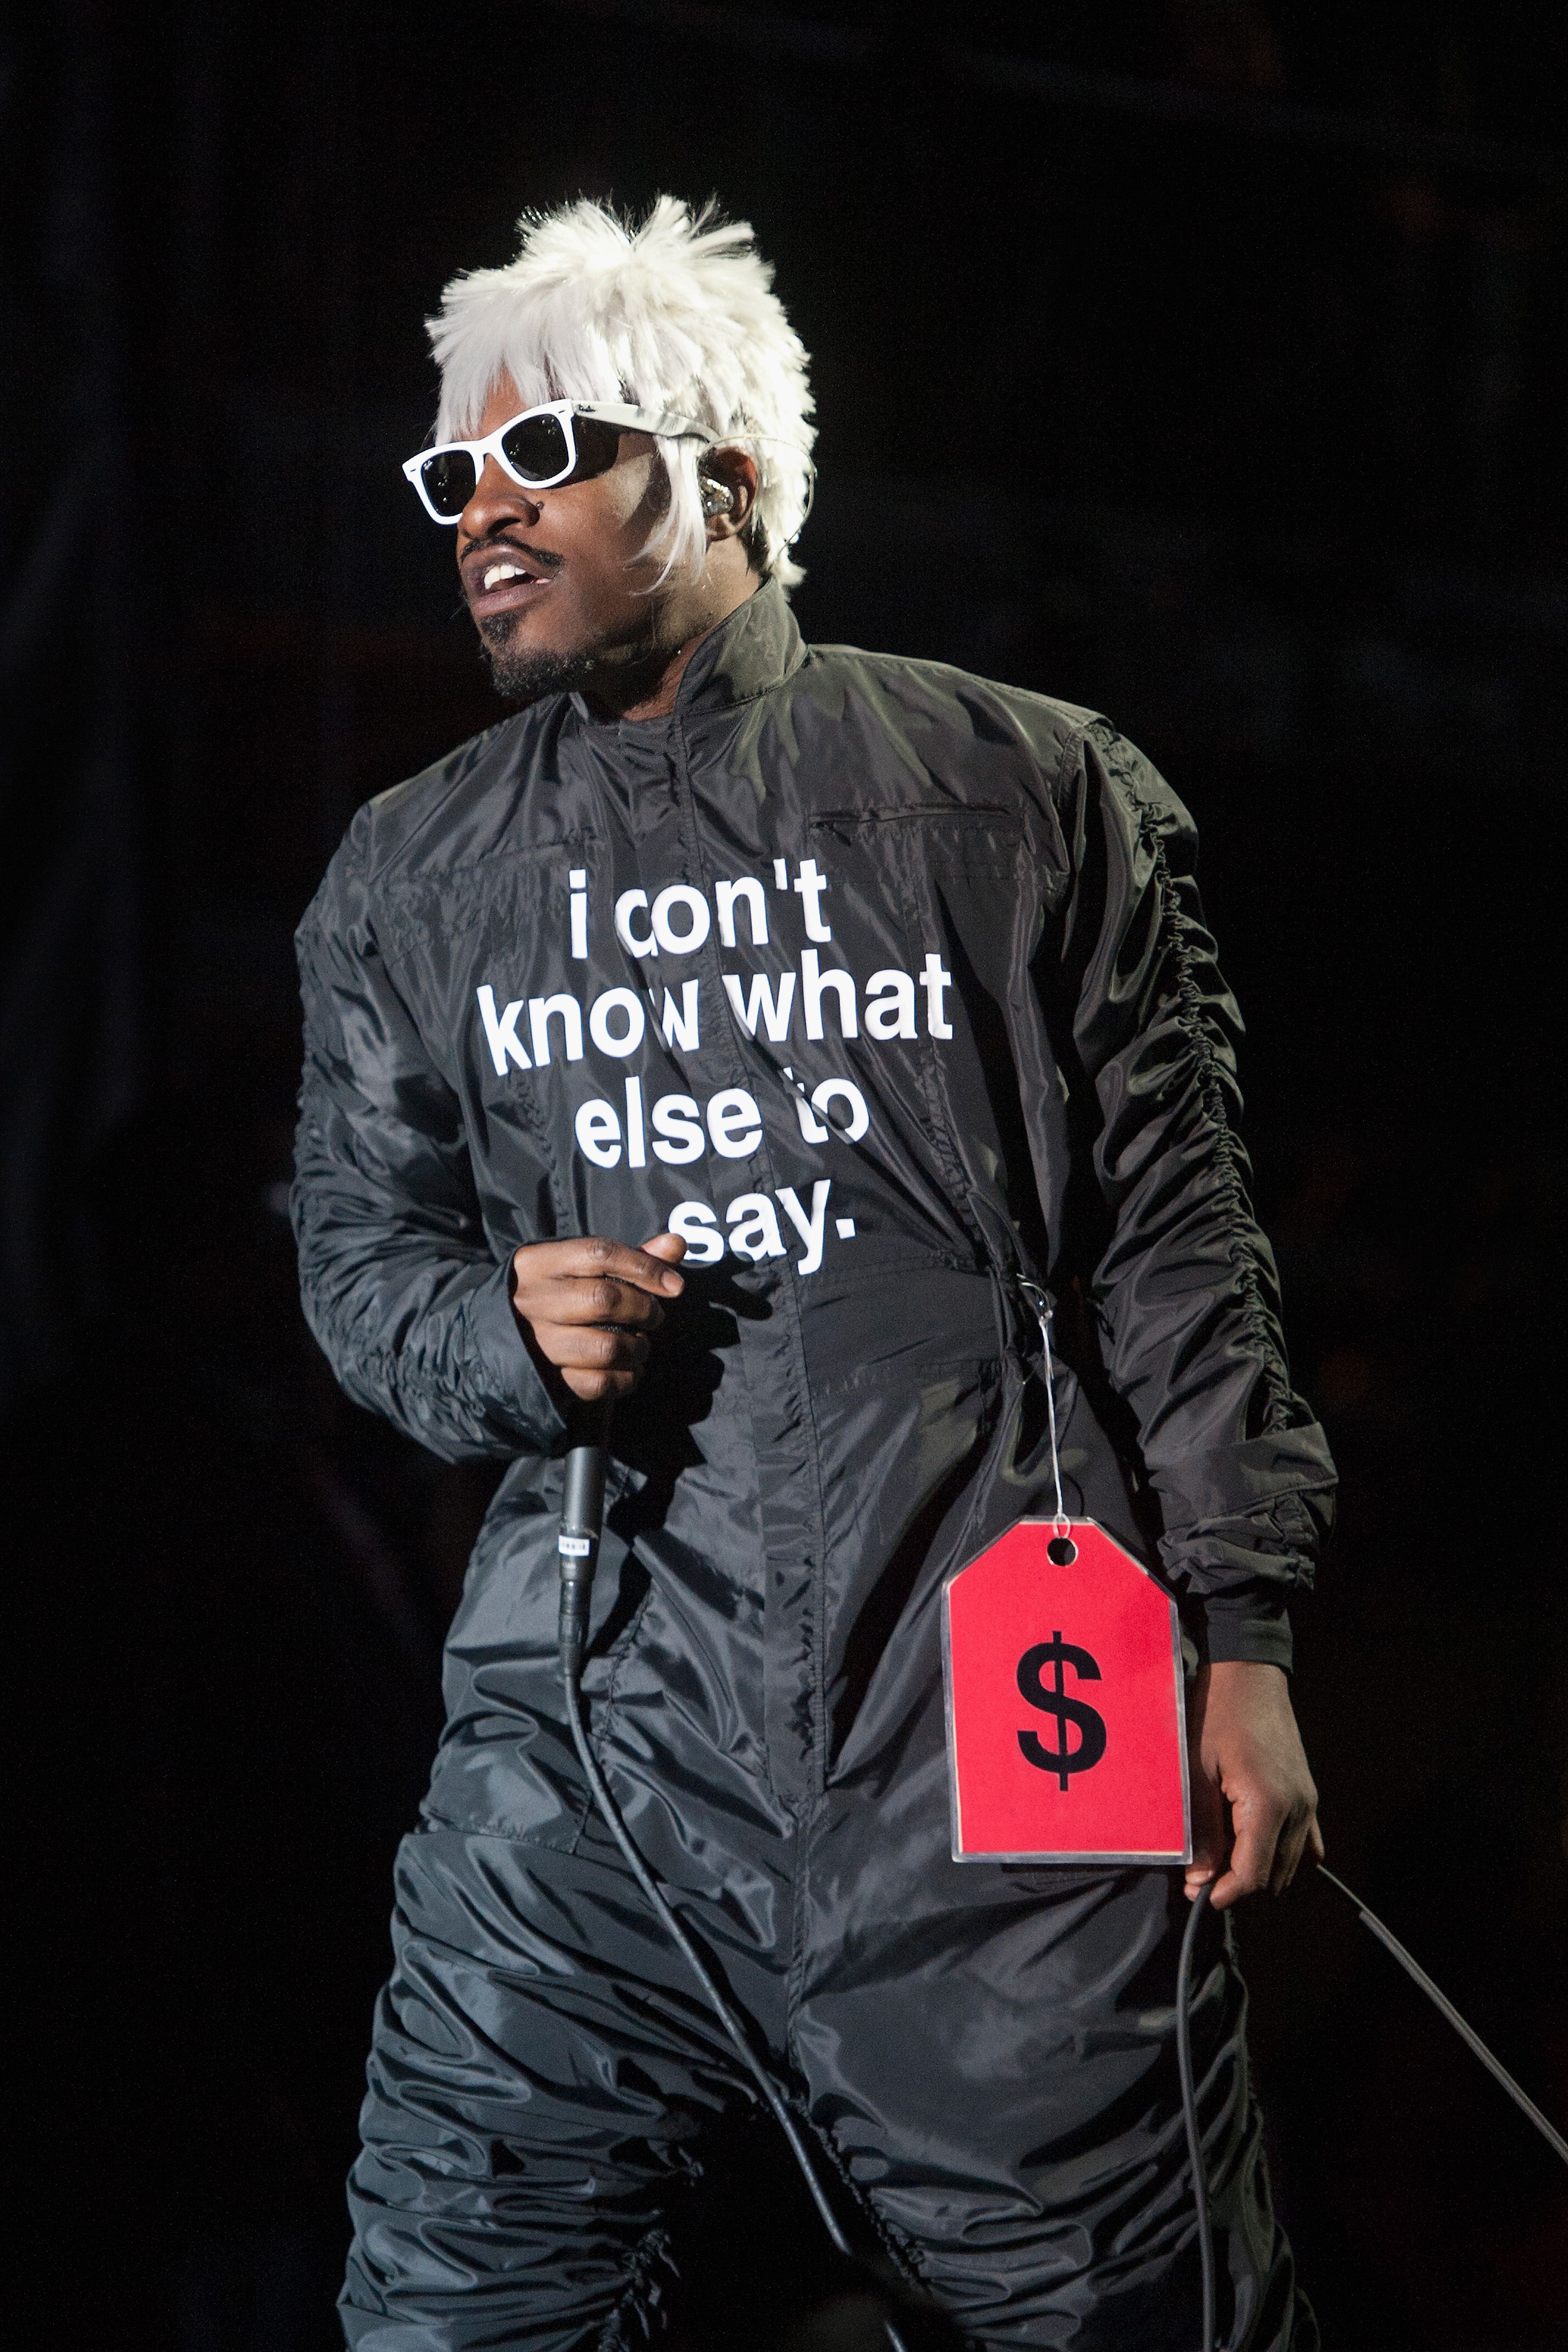 André 3000 Just Released 13 Limited-Edition Tees to Benefit the